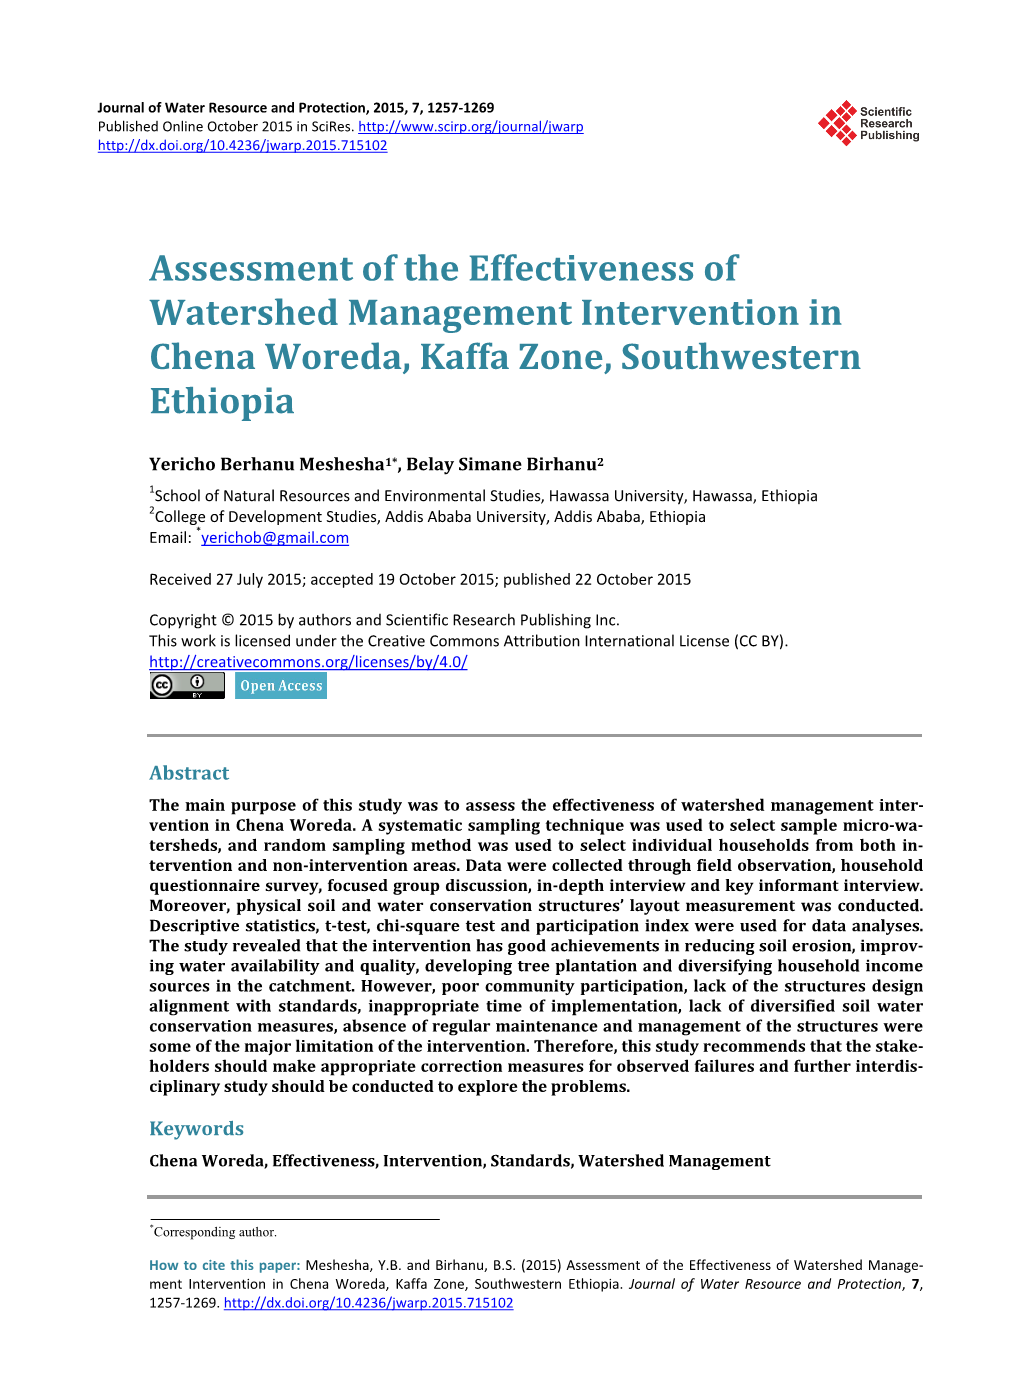 Assessment of the Effectiveness of Watershed Management Intervention in Chena Woreda, Kaffa Zone, Southwestern Ethiopia